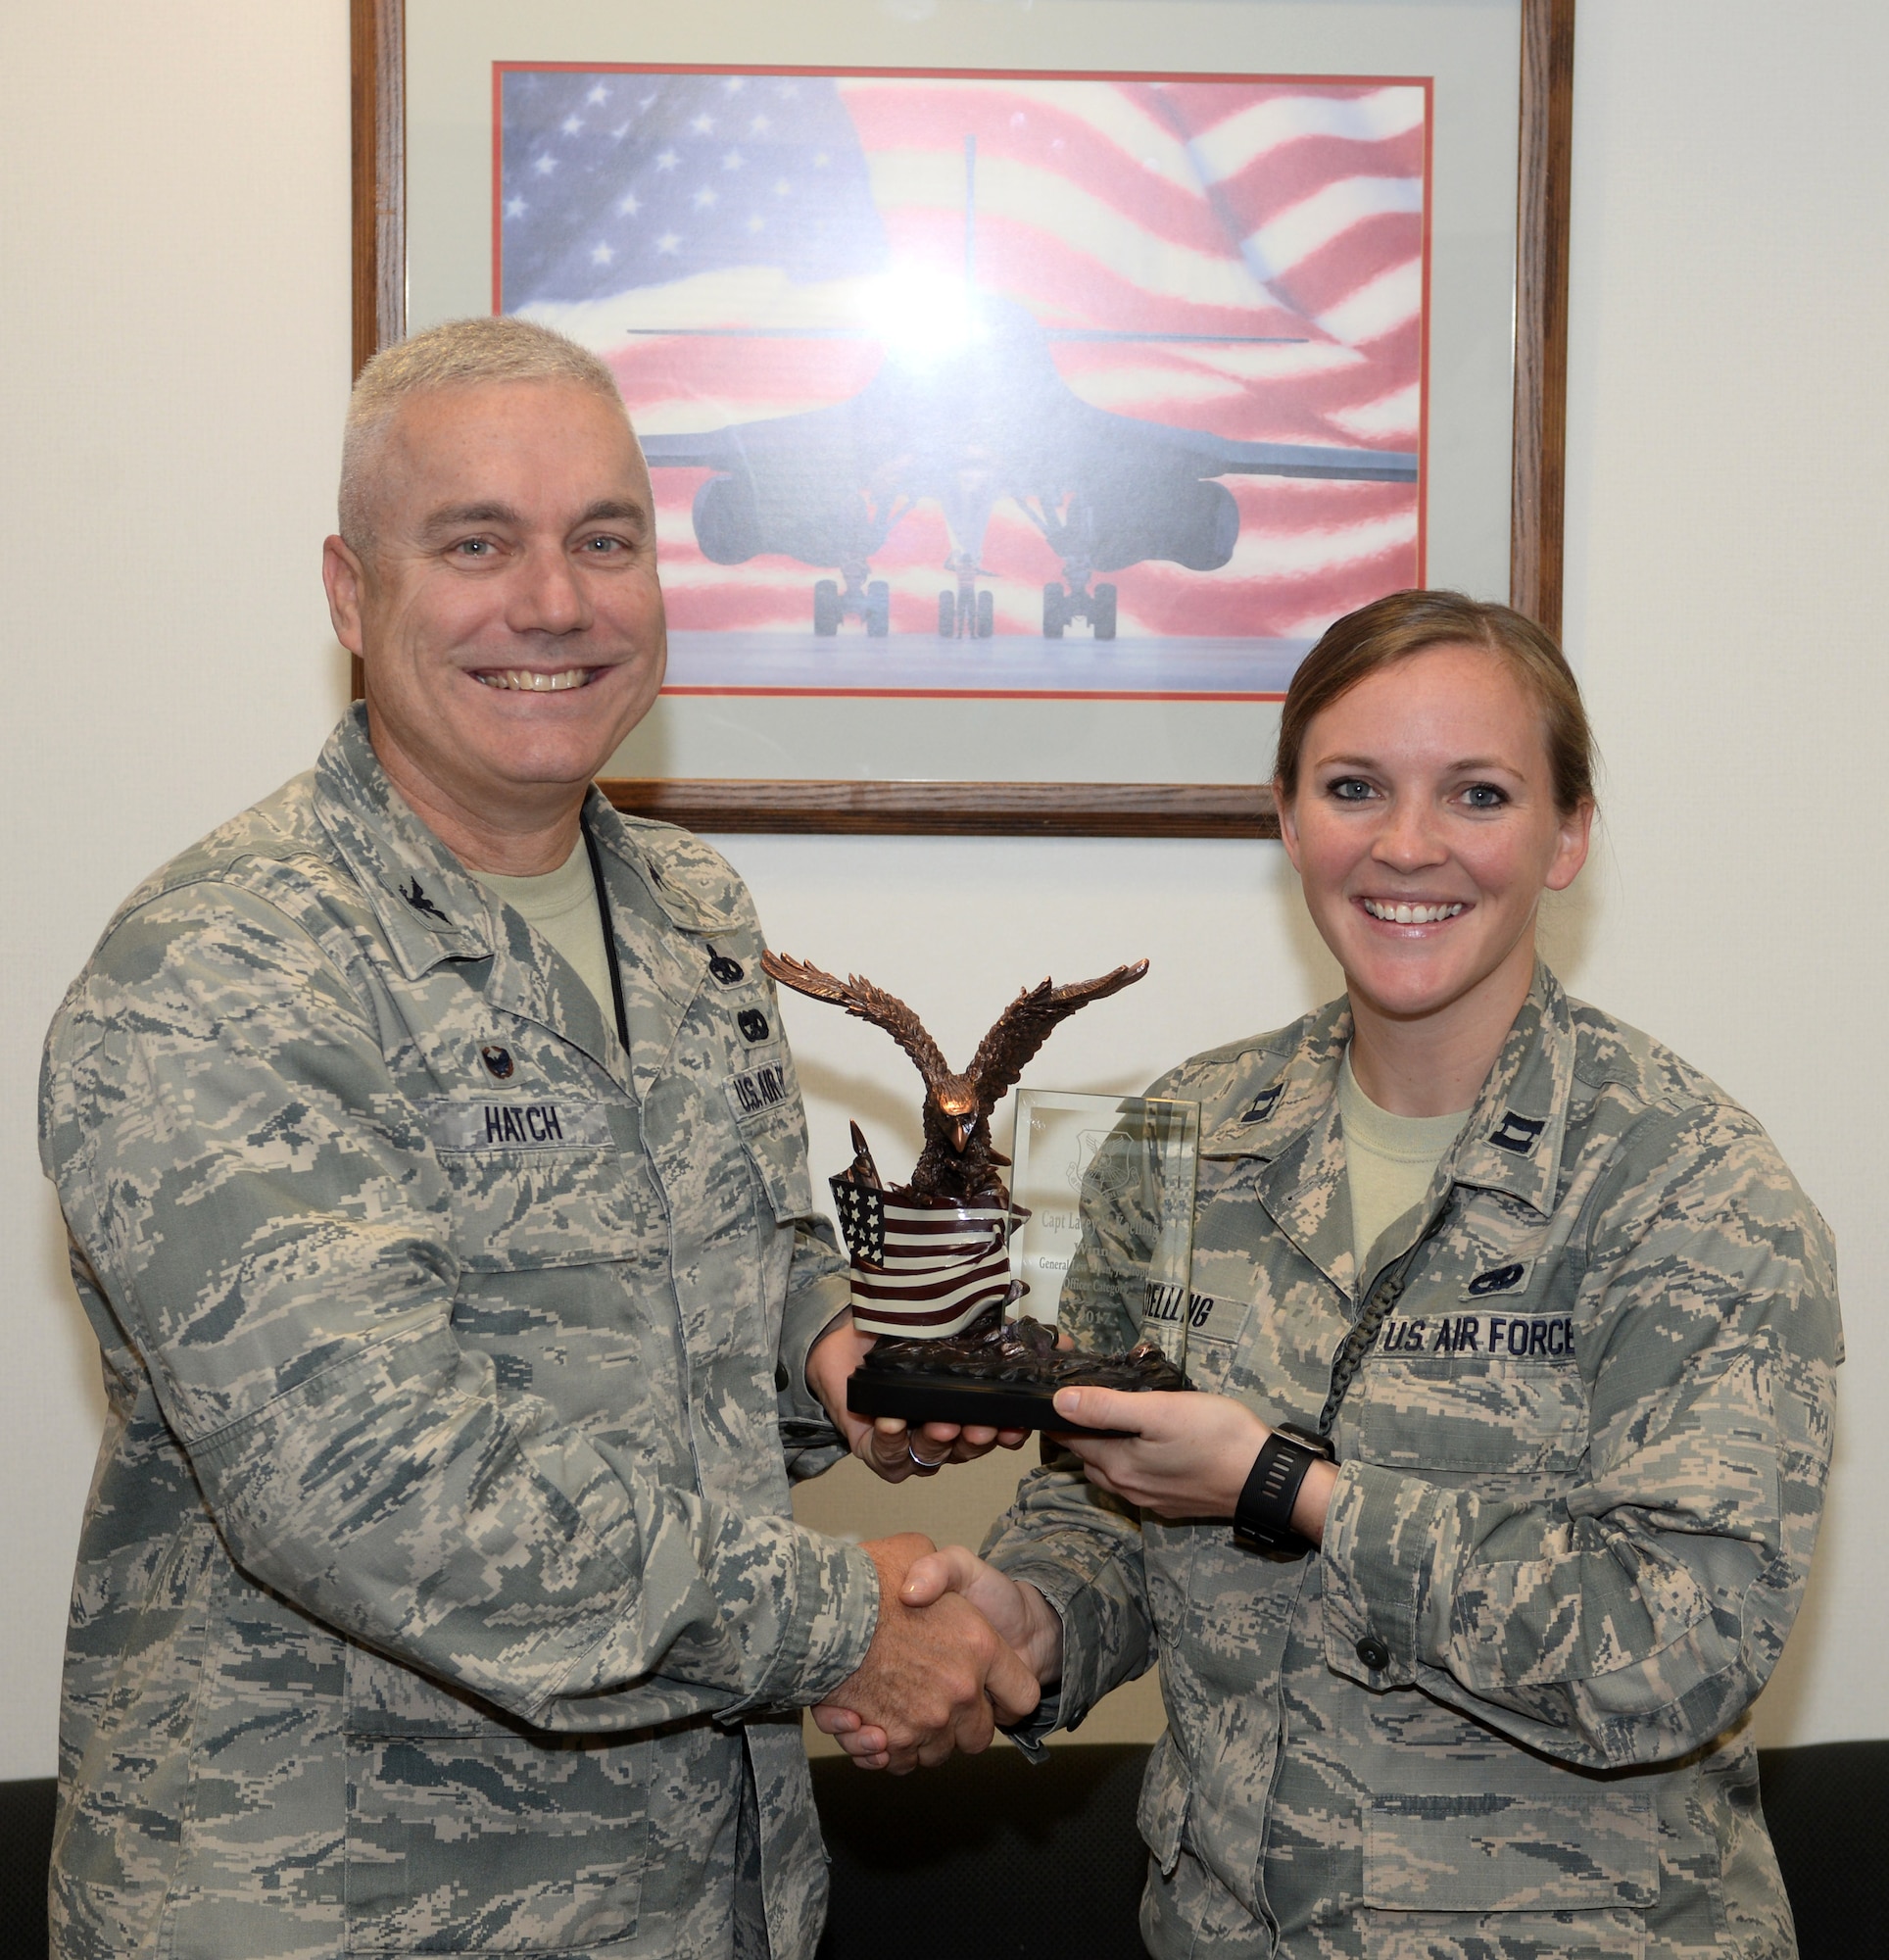 Capt. Lacey Koelling, officer in charge of the 34th Aircraft Maintenance Unit, and Col. Bernard J. Hatch III, the commander of the 28th Maintenance Group, hold the General Lew Allen, Jr., Trophy which was presented to Koelling at Ellsworth Air Force Base, S.D., Sept. 26, 2017. Koelling earned the award for her actions during her deployment to Al-Dhafra Air Base in the United Arab Emirates. (U.S. Air Force photo by Airman 1st Class Thomas Karol)